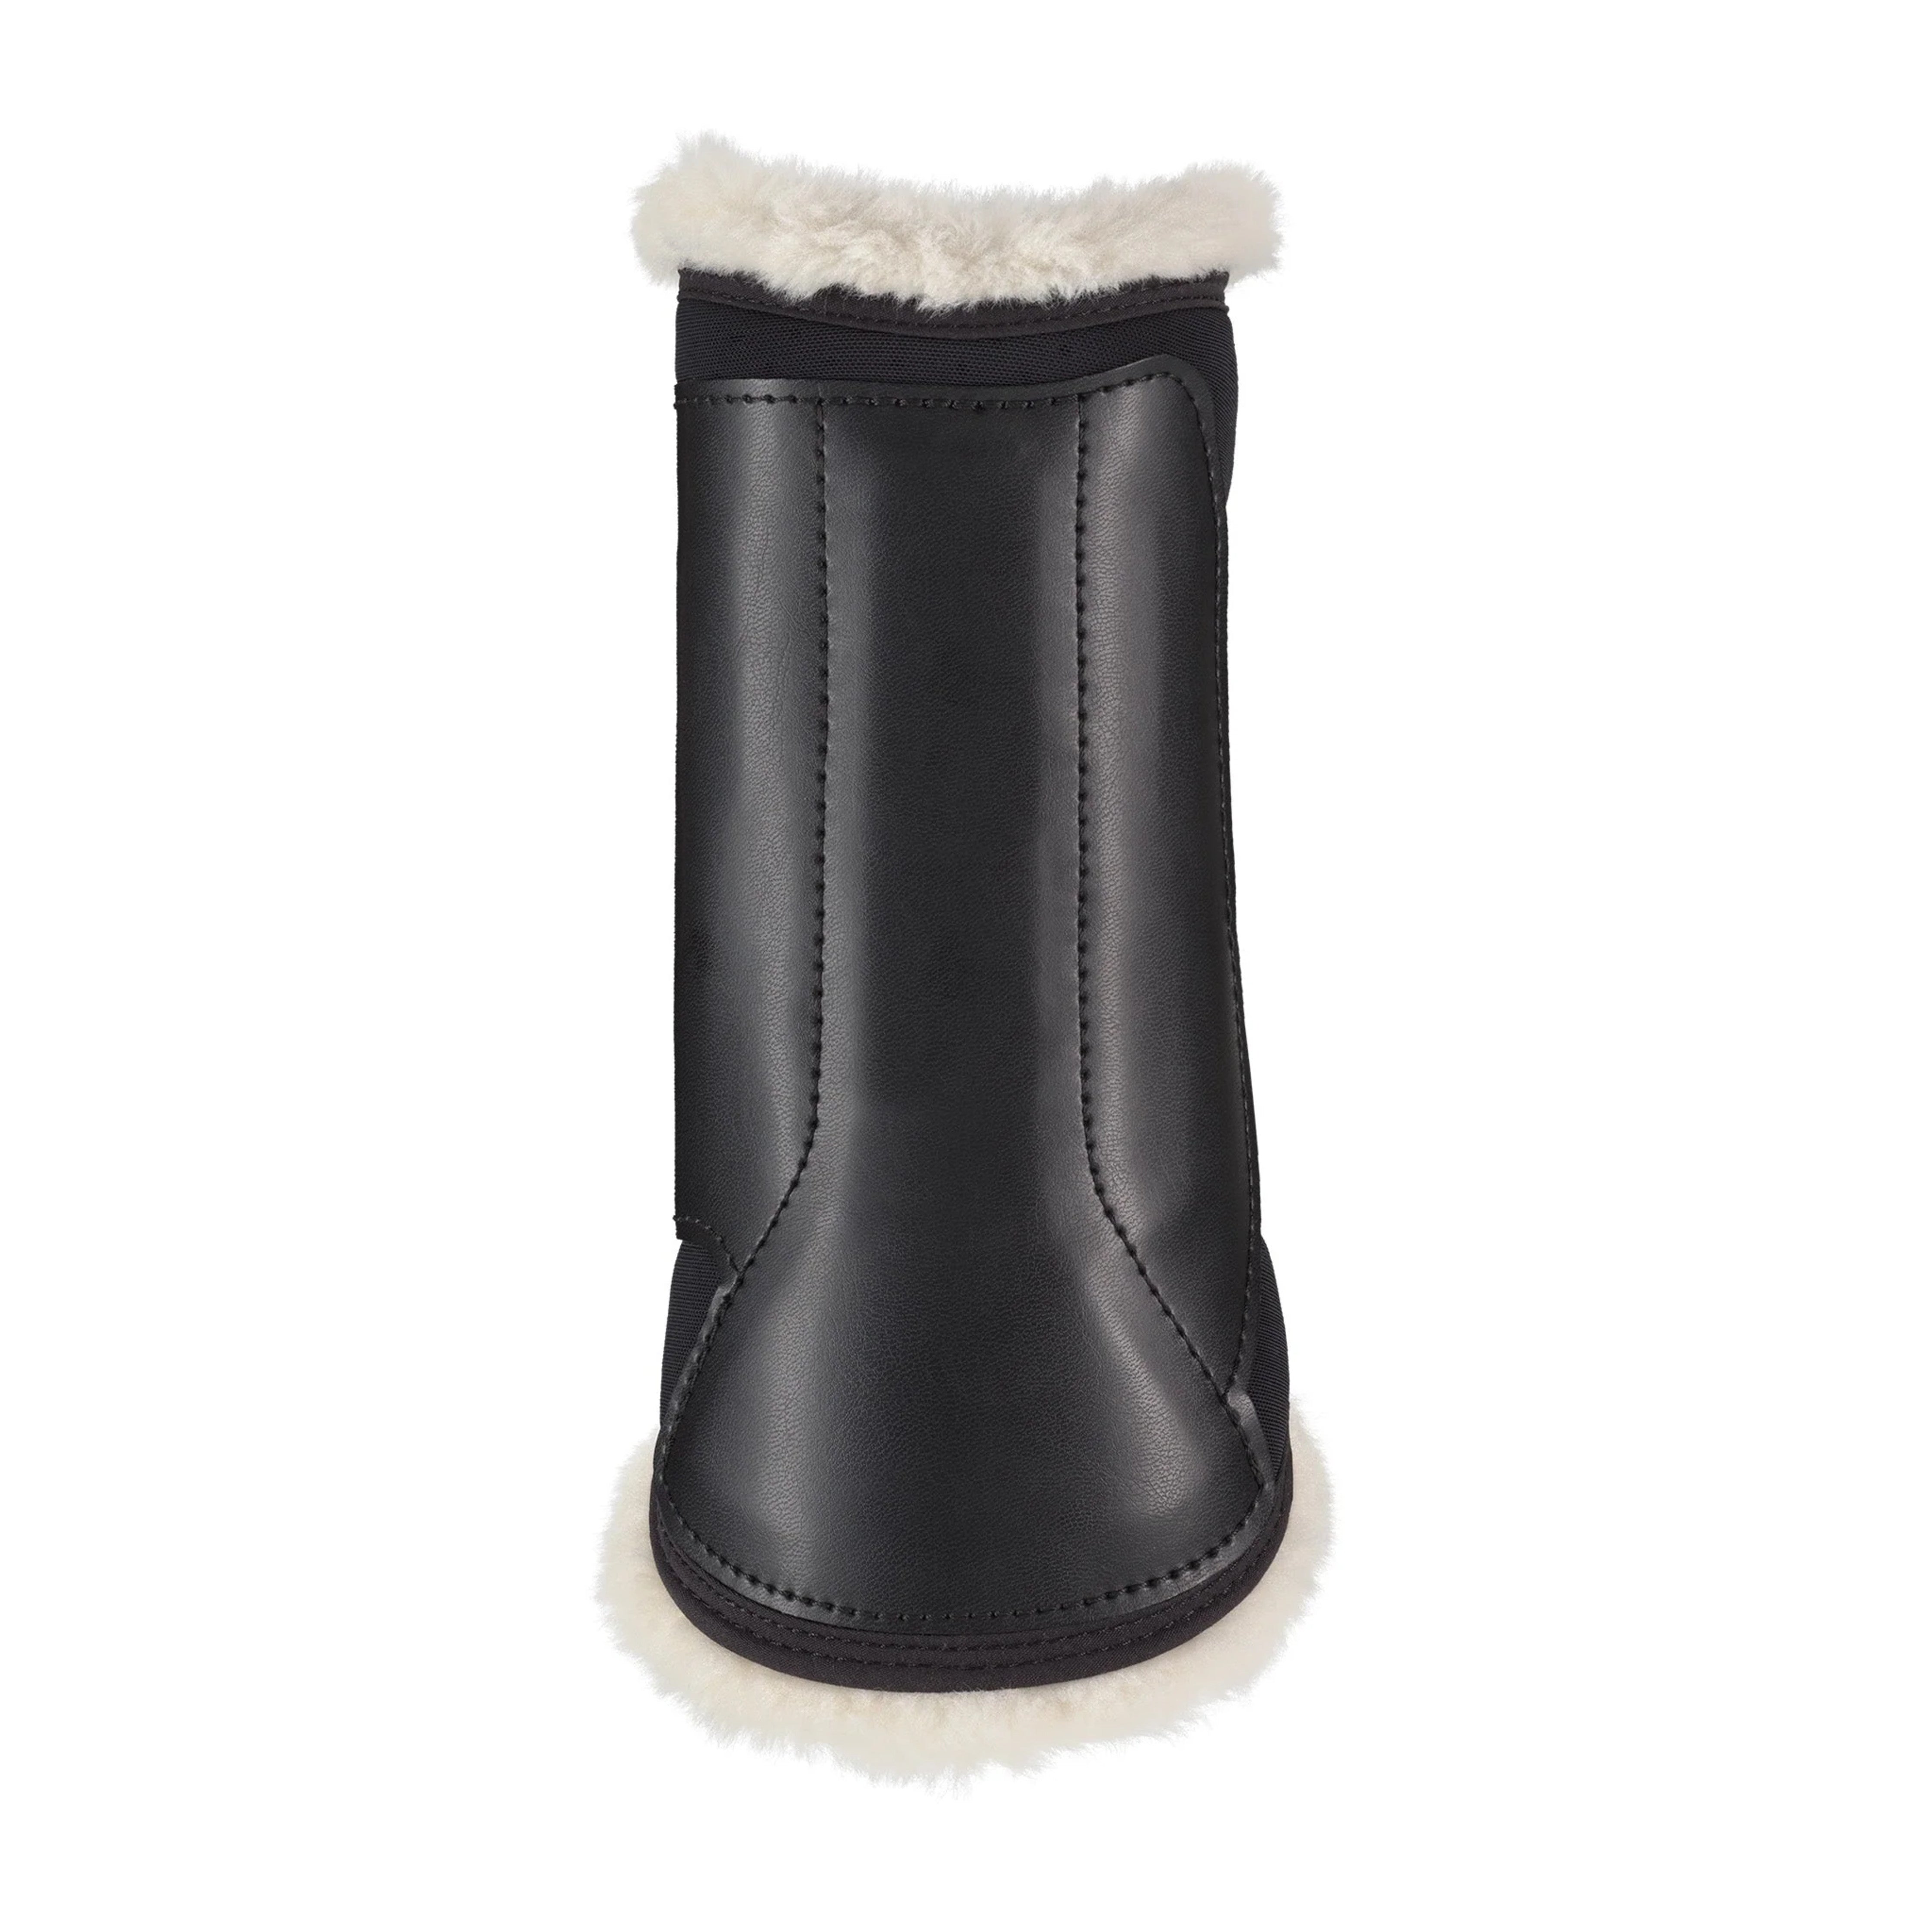 EquiFit Everyday Front Boot Vegan SheepsWool